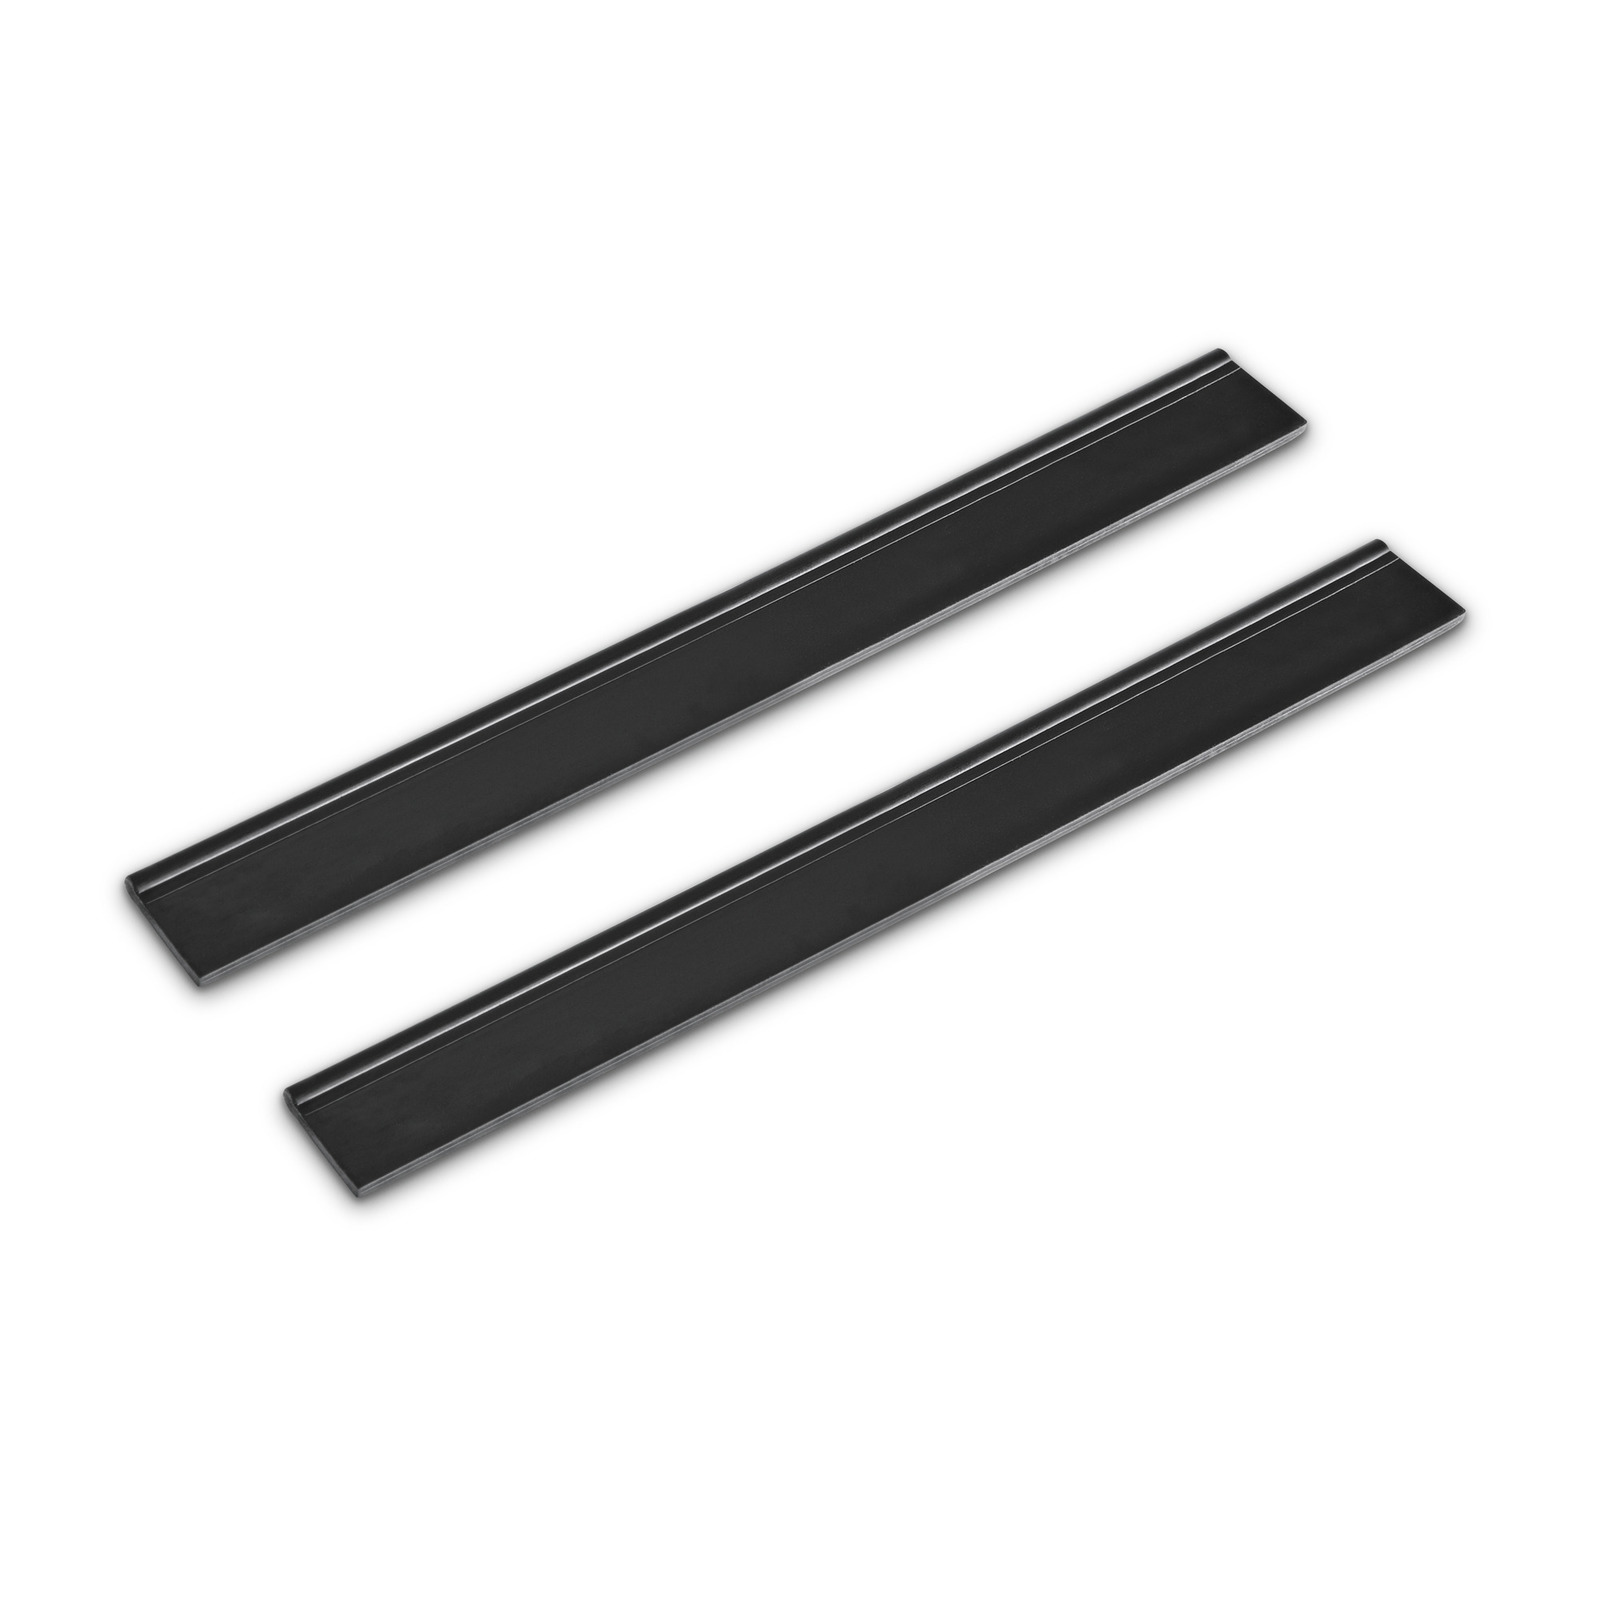 2pcs Window Vacuum Cleaner Squeegee Blades Spare For Karcher WV50 WV60 WV70 WV75